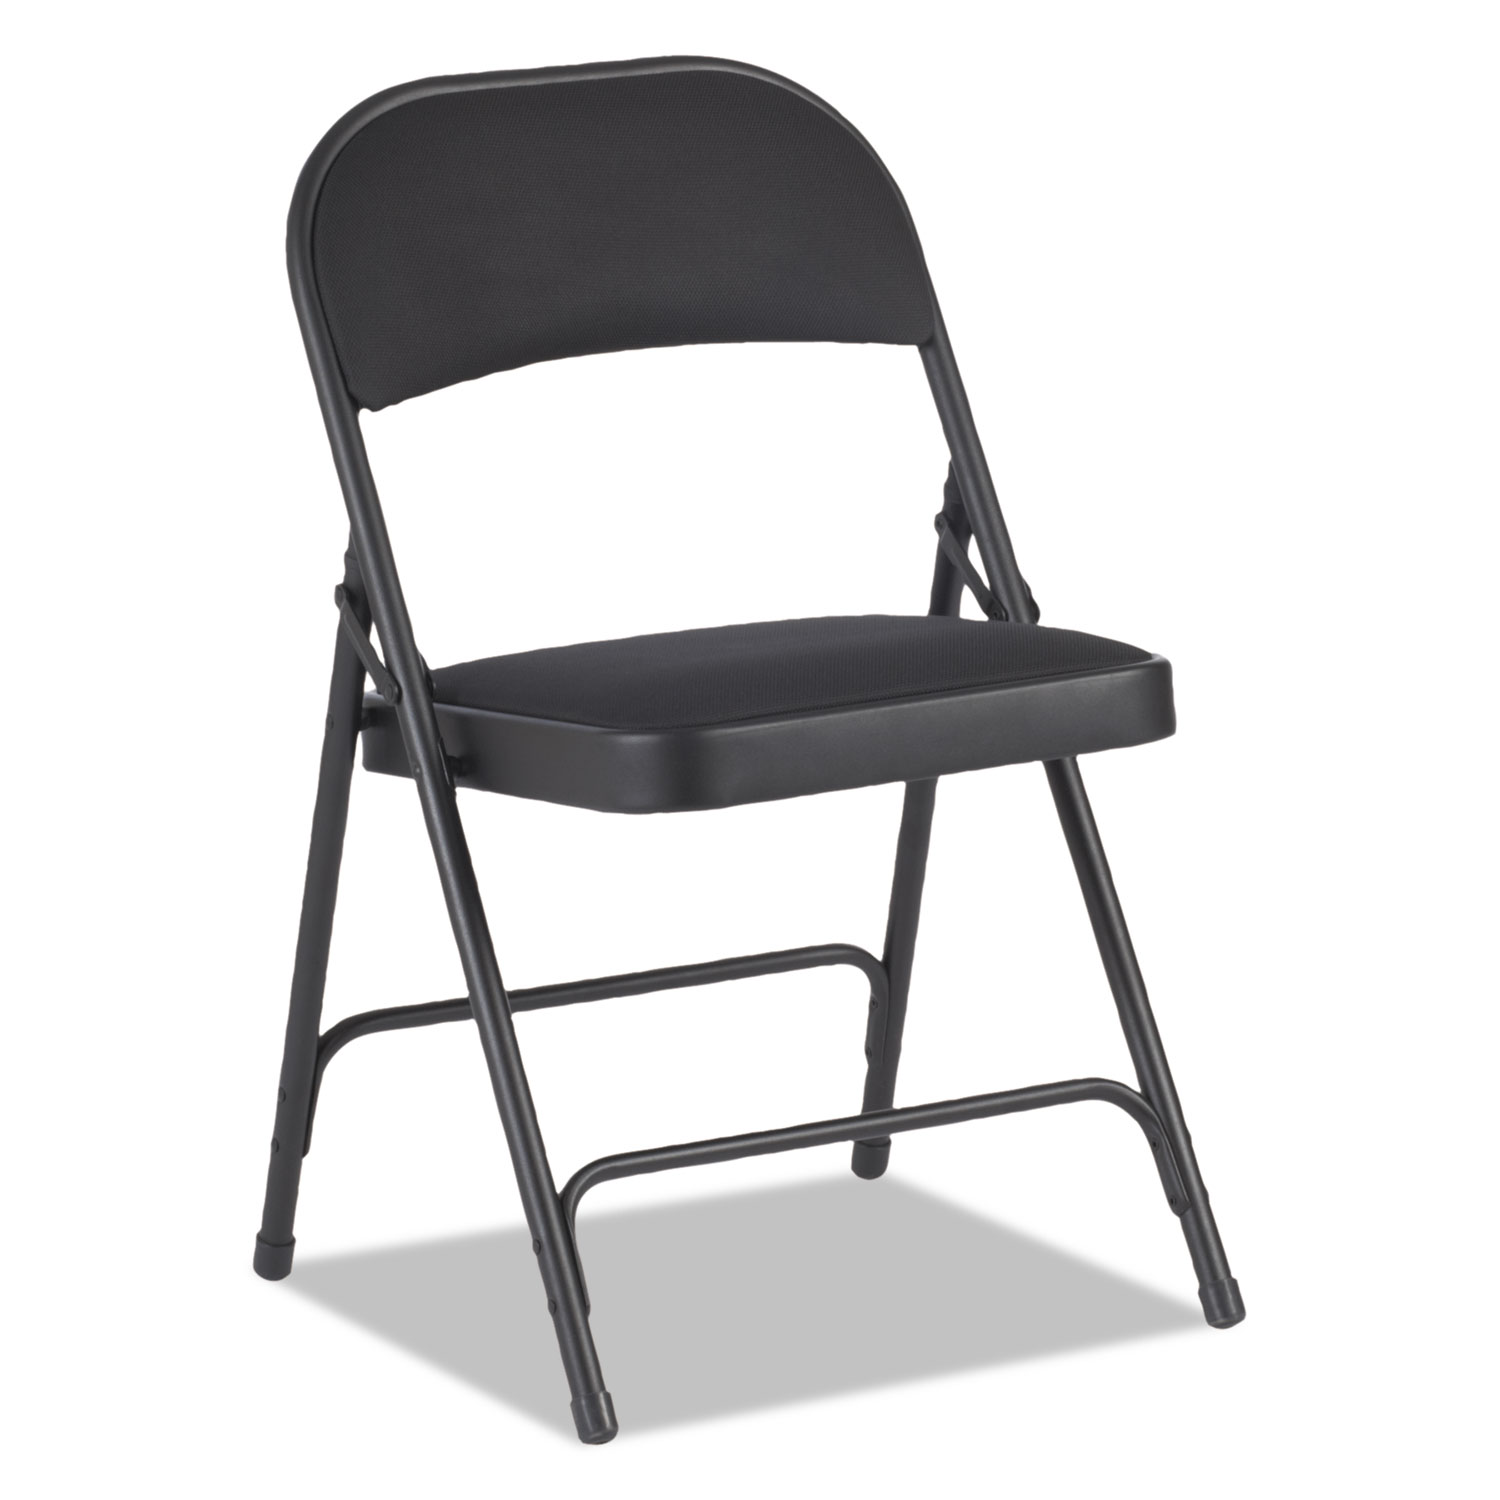 Steel Folding Chair with Two-Brace Support, Fabric Back/Seat, Graphite, 4/Carton